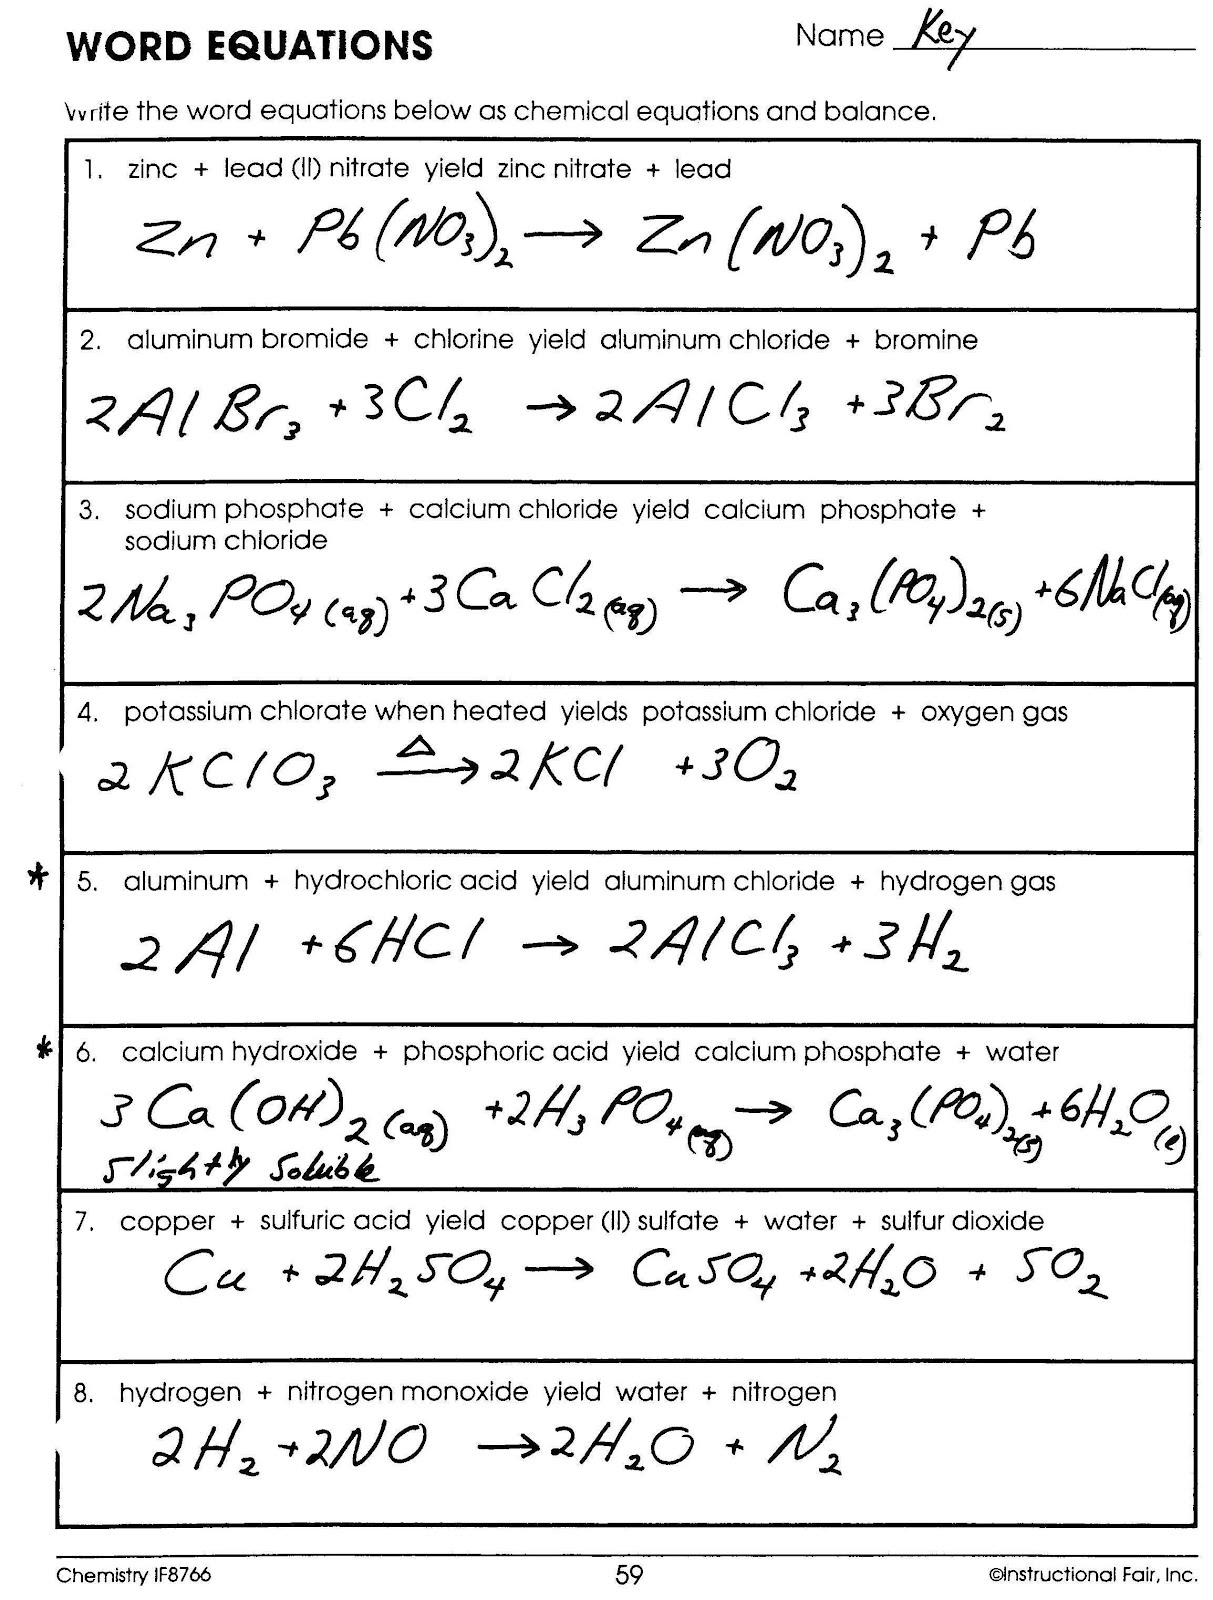 15-best-images-of-translating-words-to-equations-worksheets-translating-algebraic-expressions